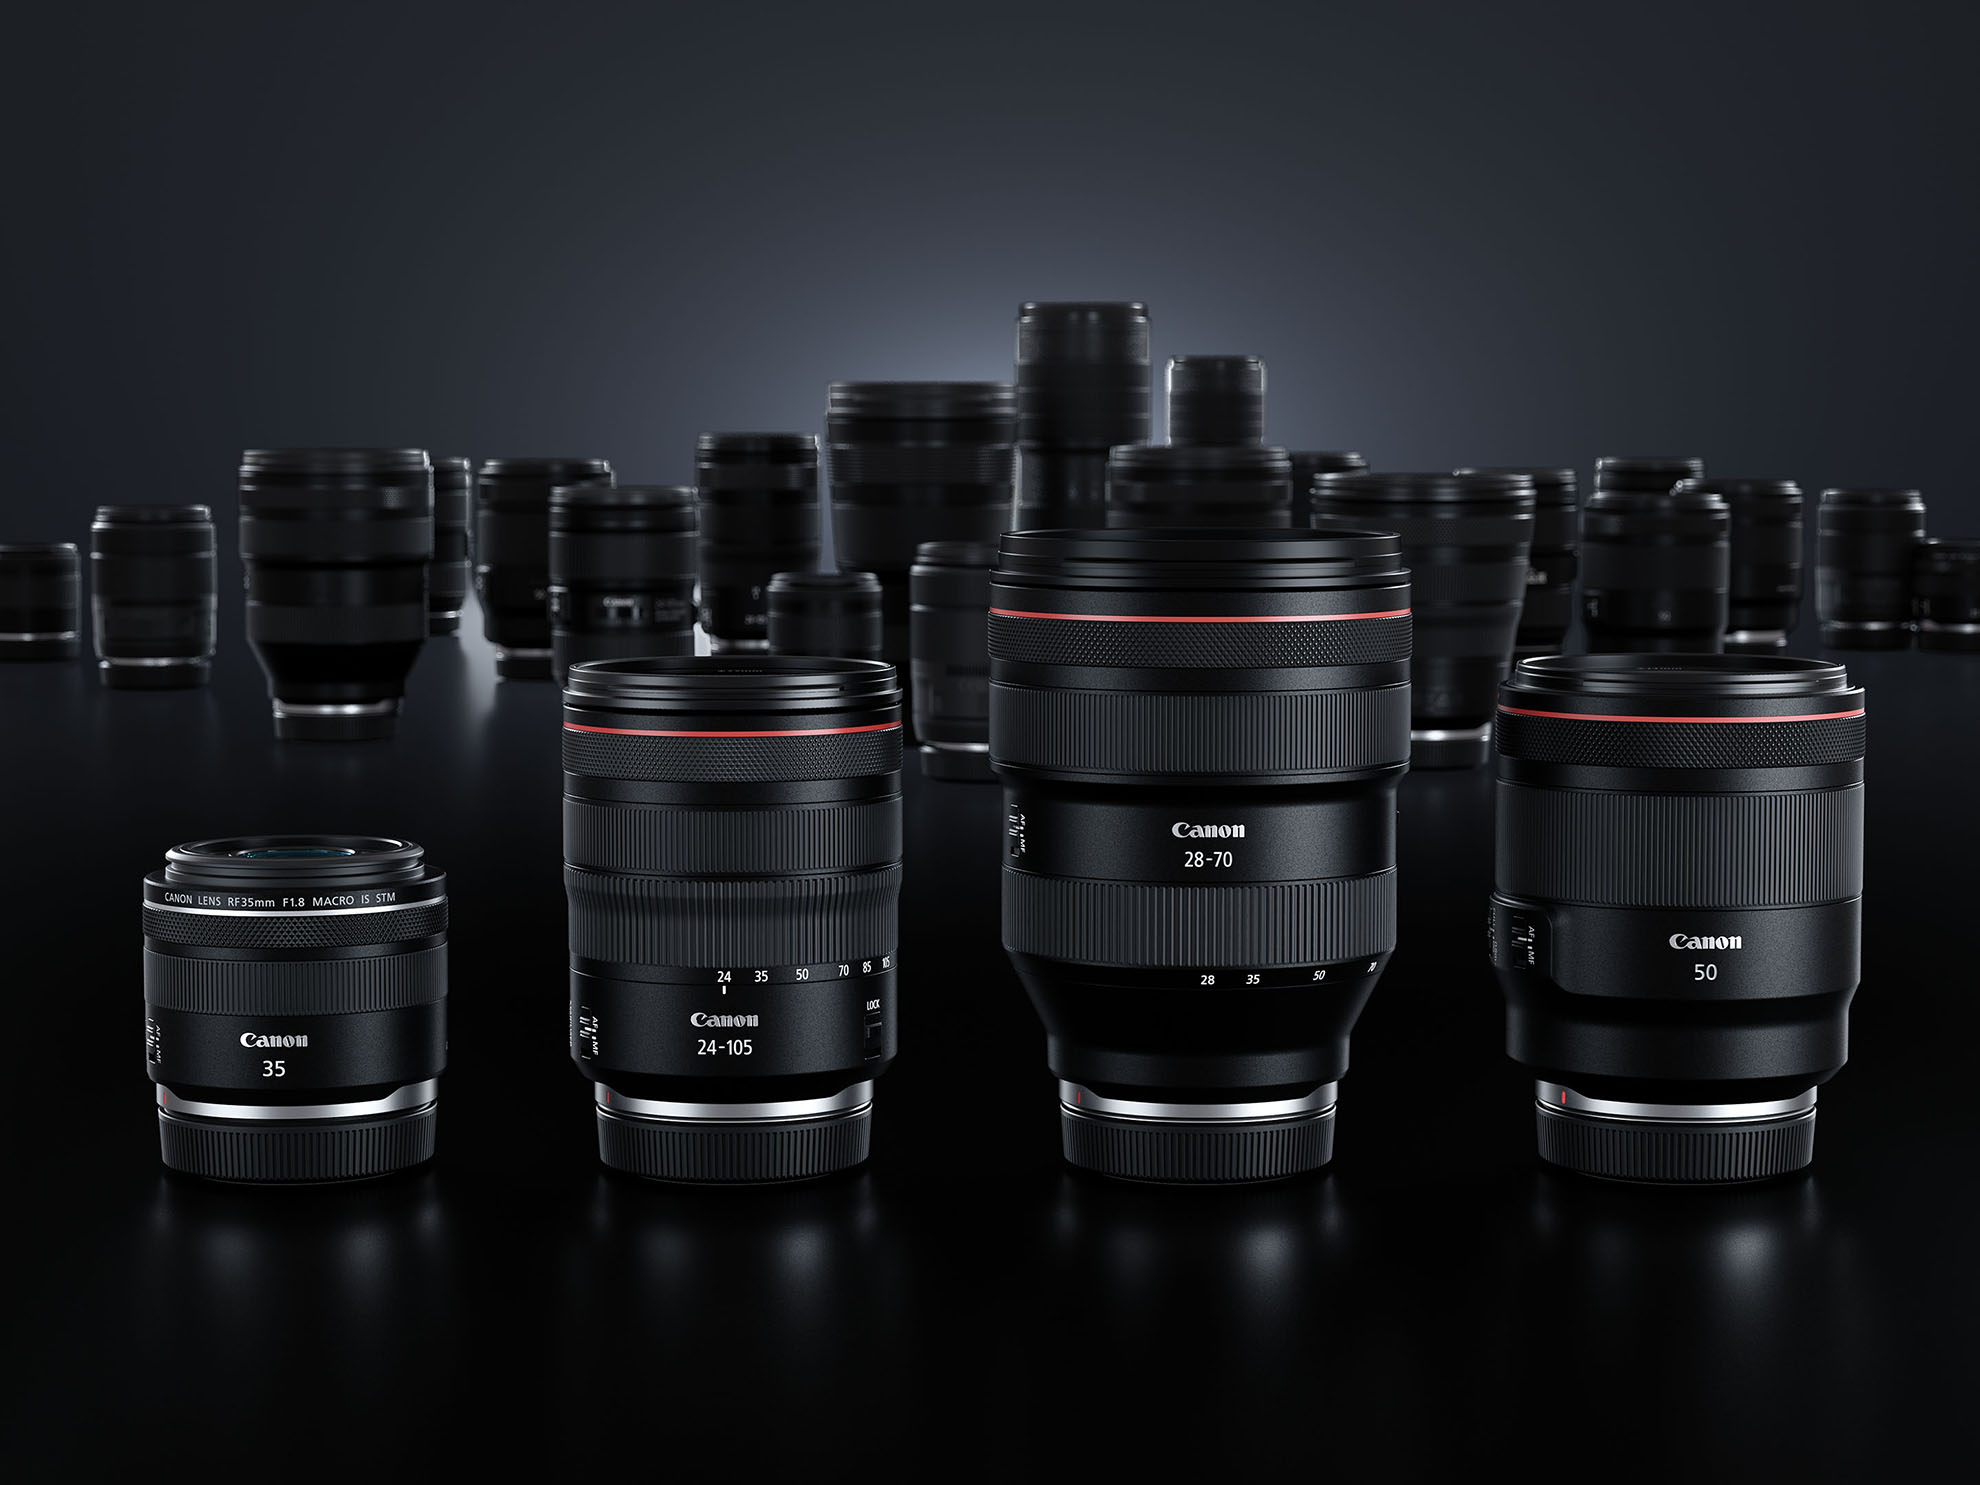 Canon 35mm, 24-105mm, 28-70mm and 50mm lens products lined up in product image